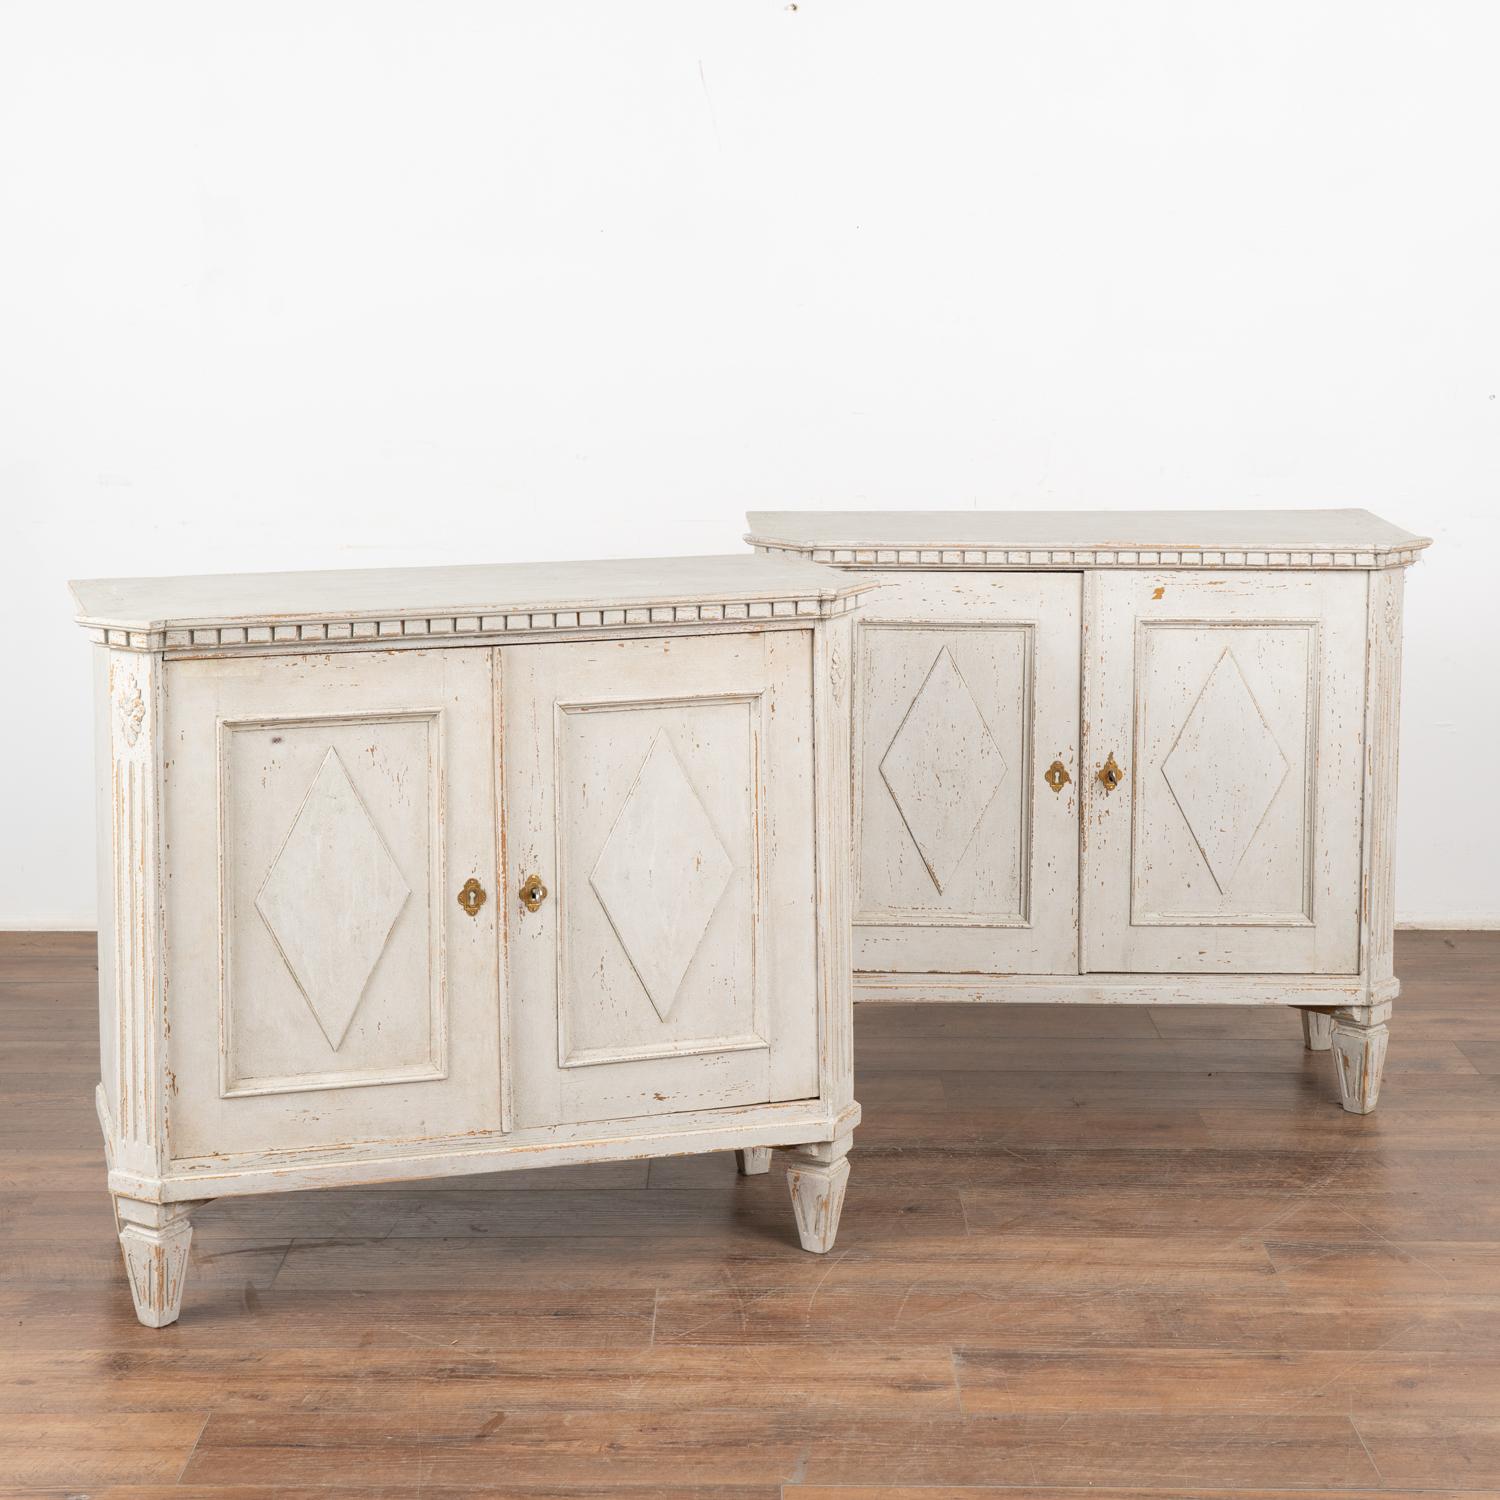 Pair, Swedish country pine cabinets or small sideboards with canted fluted sides, dentil molding and carved diamond motif on doors.
The newer, professionally applied antique white custom painted finish is perfectly distressed to fit the age and